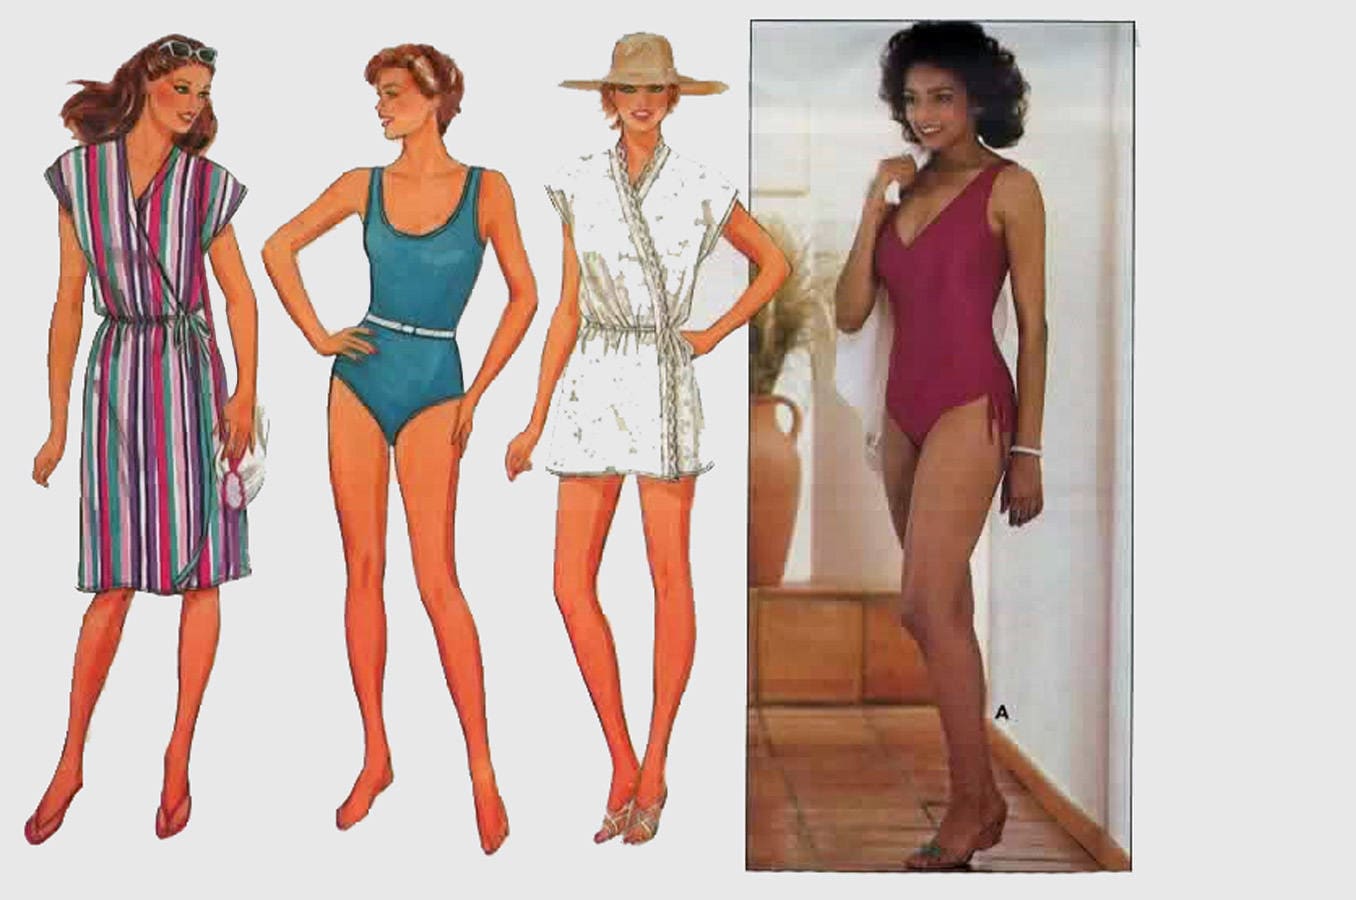 Simplicity 8633 1980s One Piece Swimsuit High Cut Leg Sewing